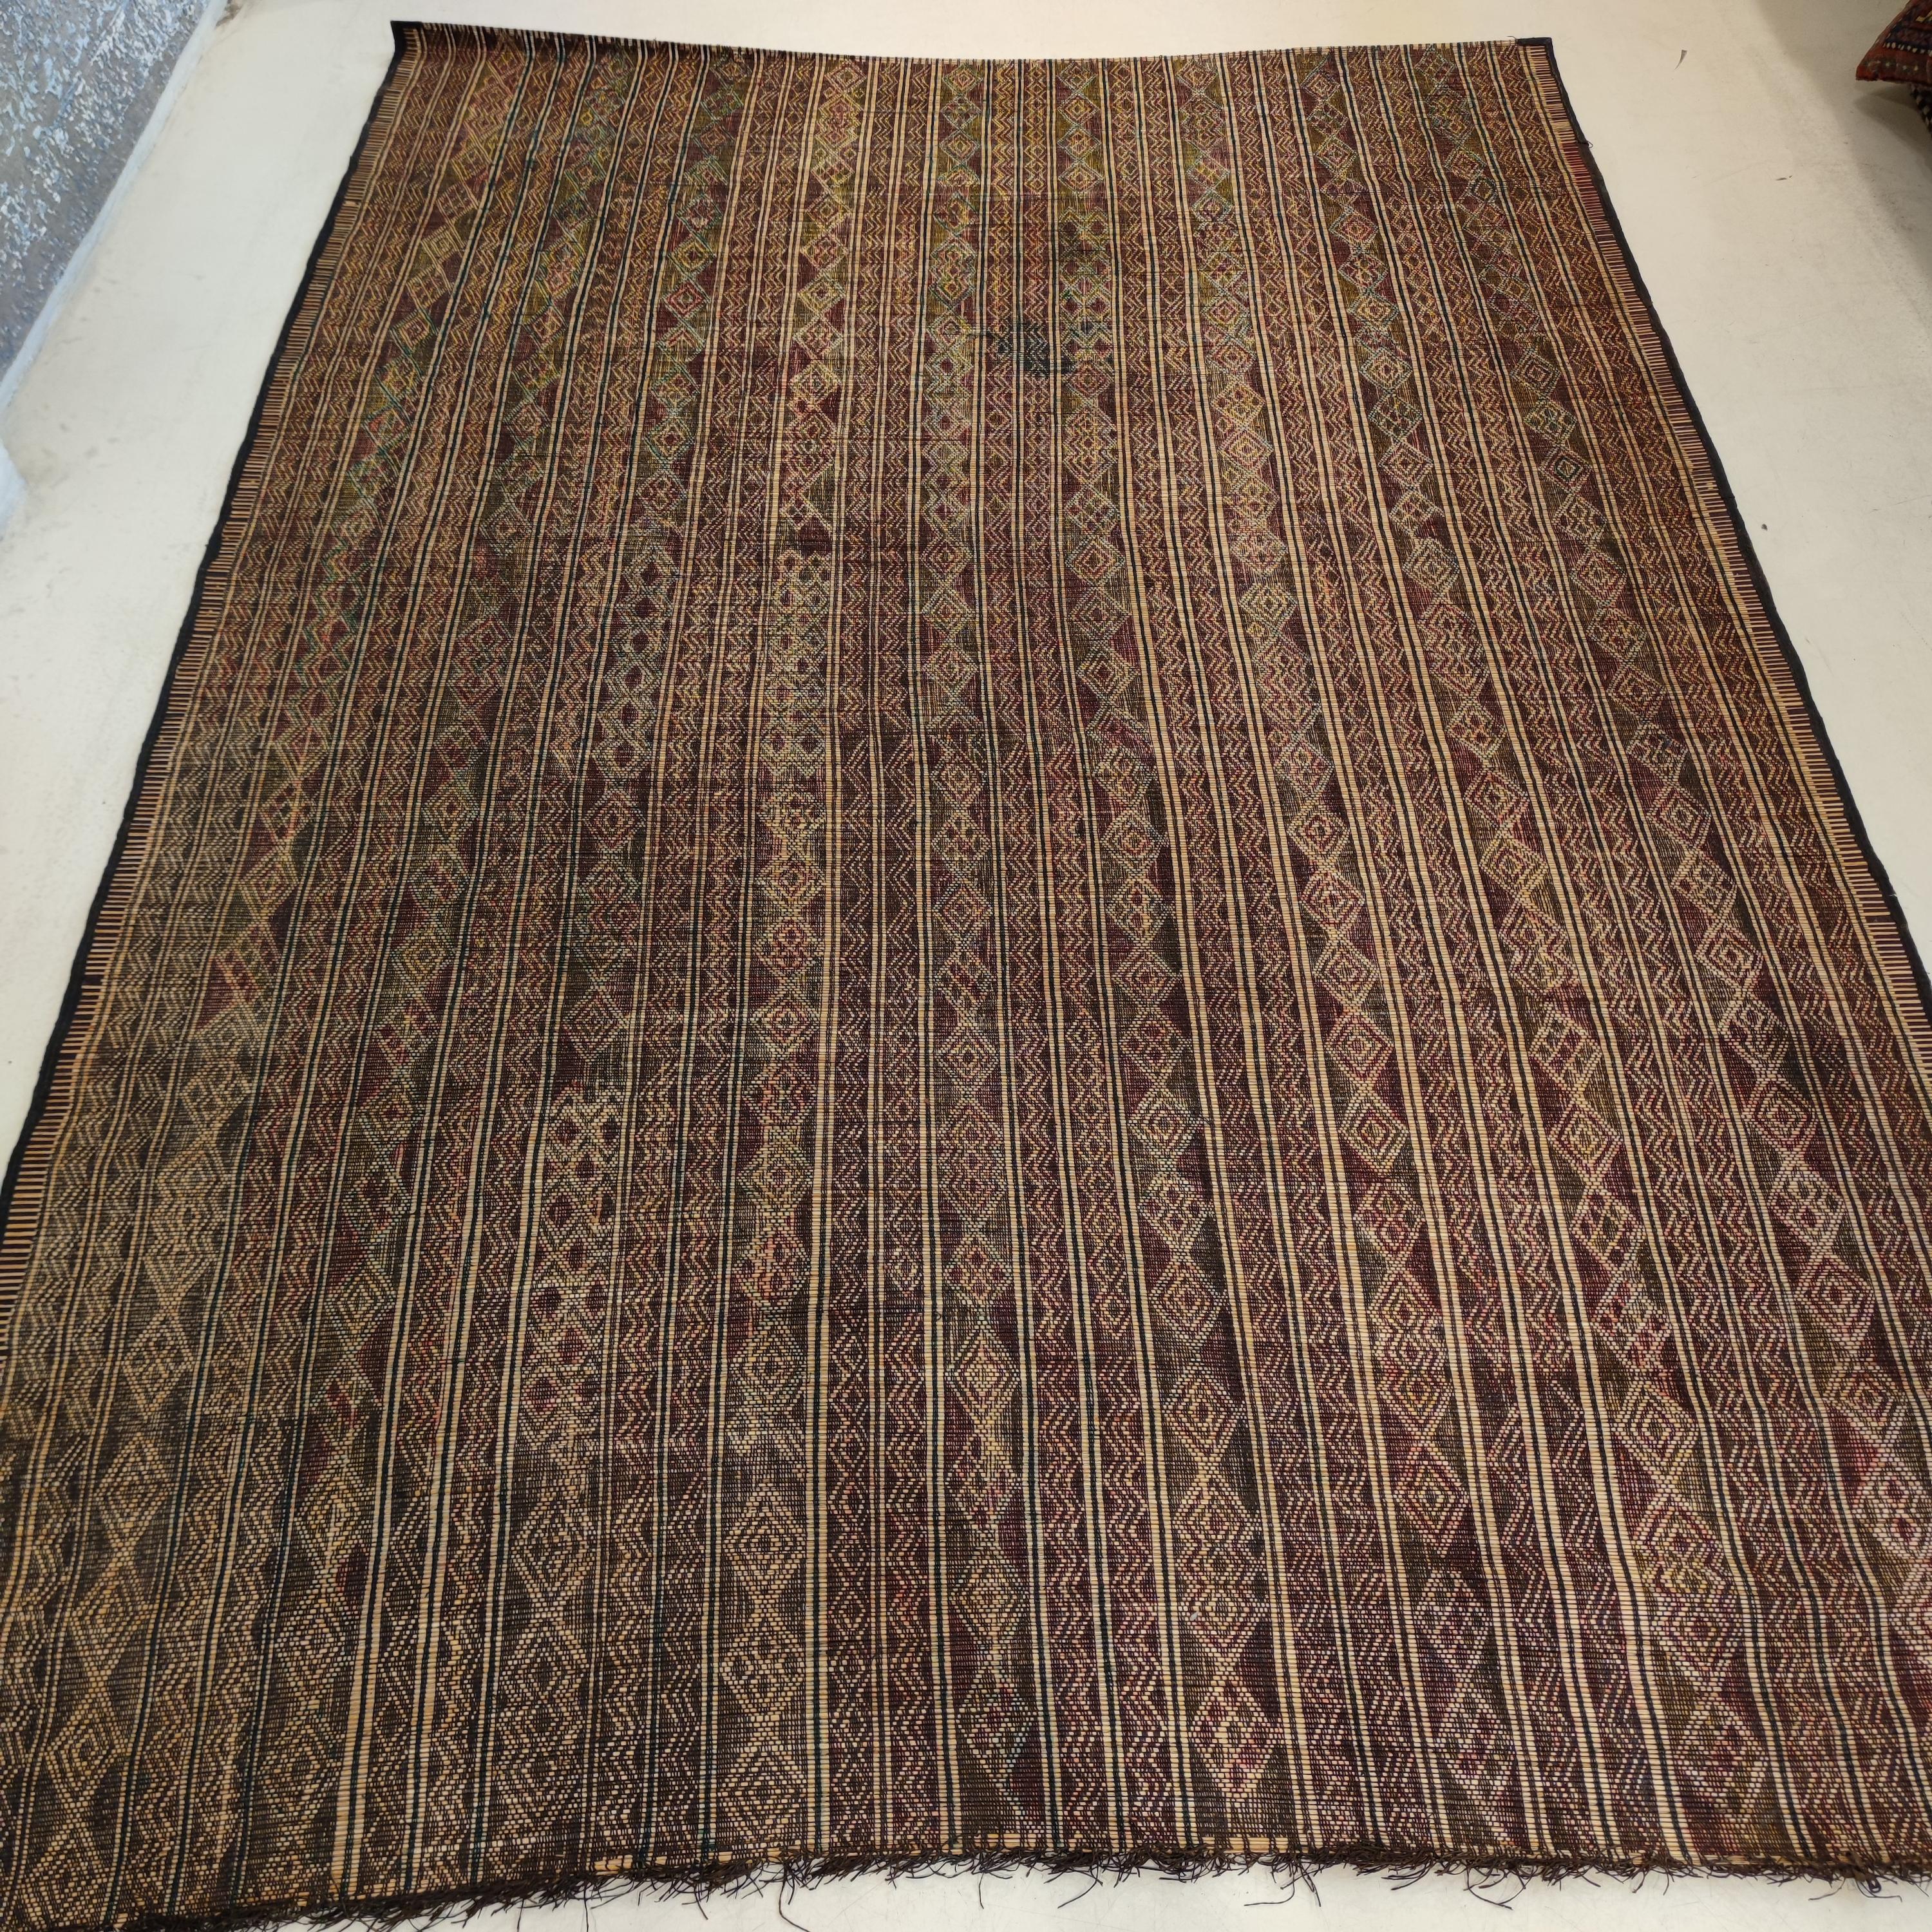 The carpets of the Tuareg, who are cattle herding nomads inhabiting a vast expanse of the Sahara desert, are among the most exciting group of weavings to appear on the market. These are woven by binding together fine straw reeds obtained from the